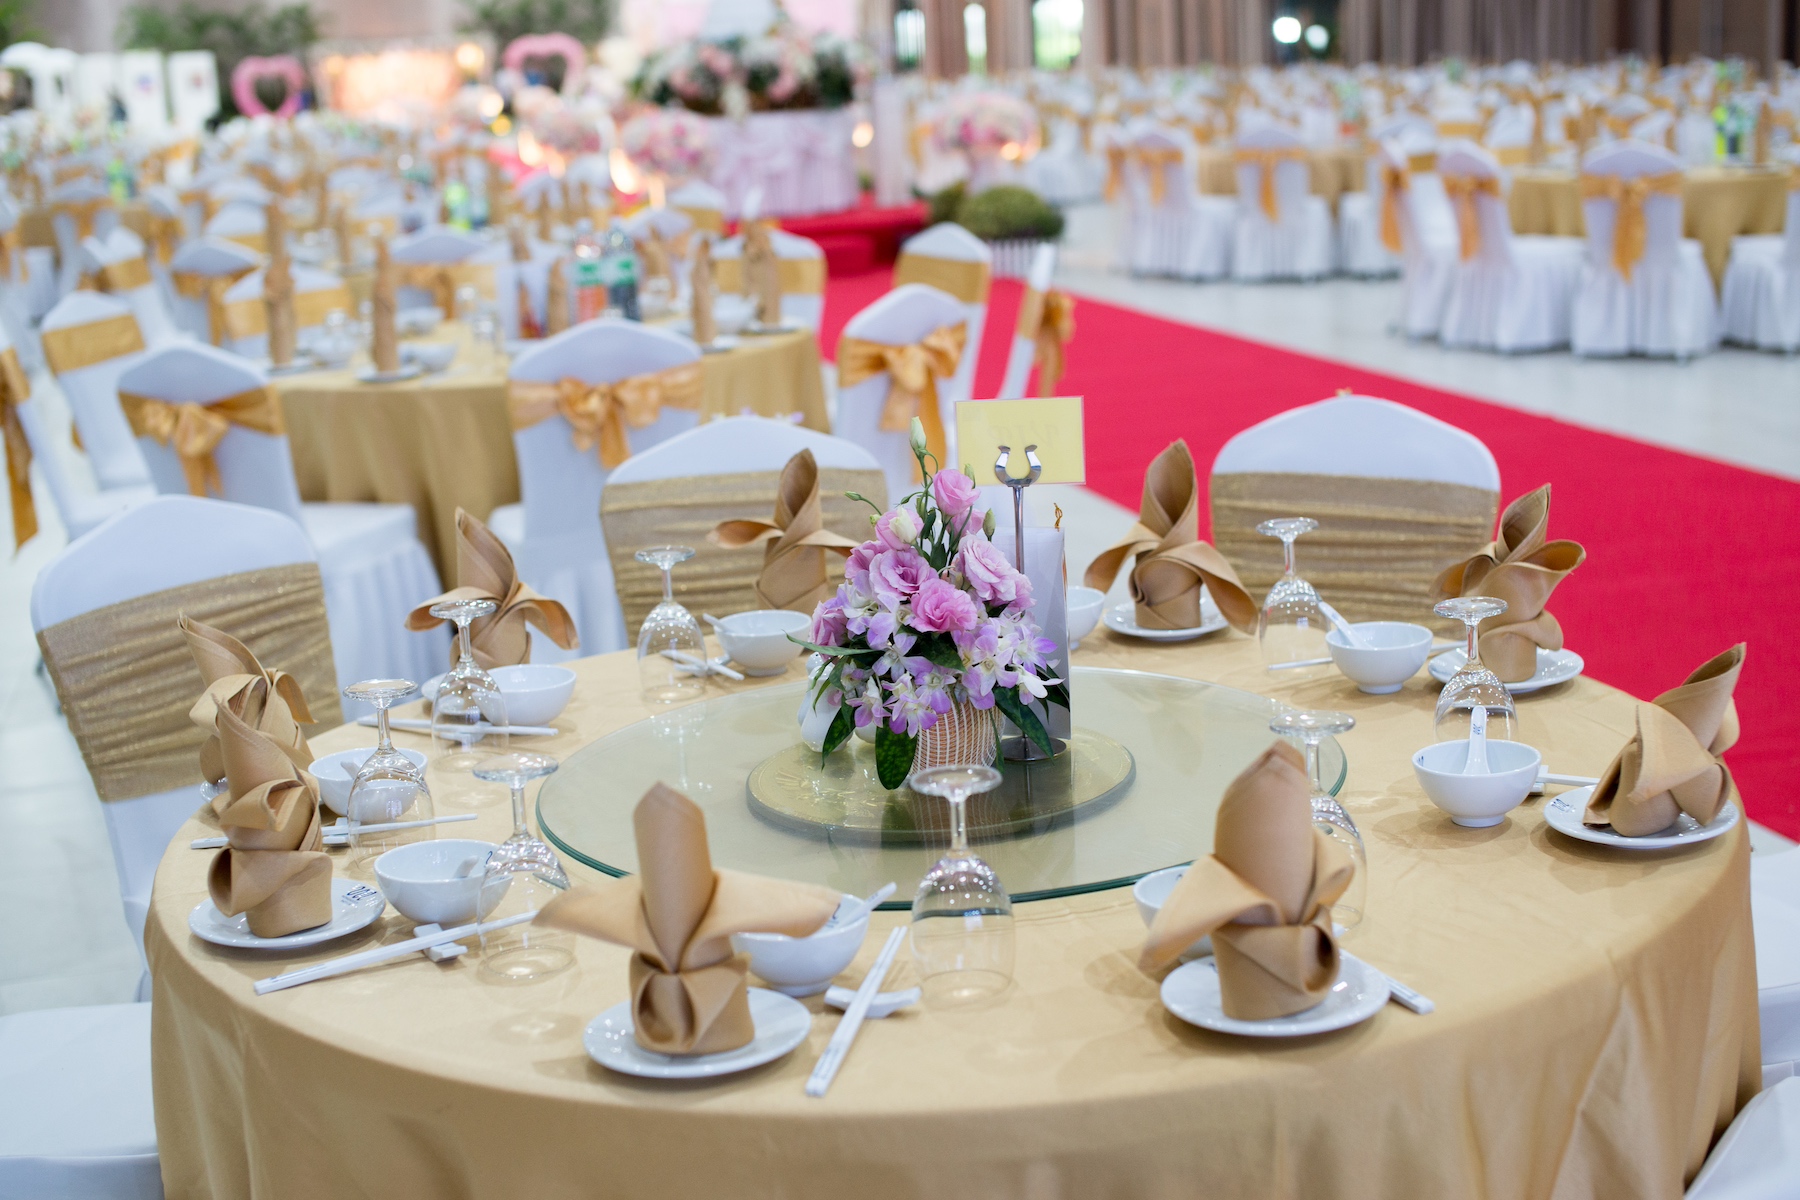 A vast banquet hall with round tables decorated for a very large wedding